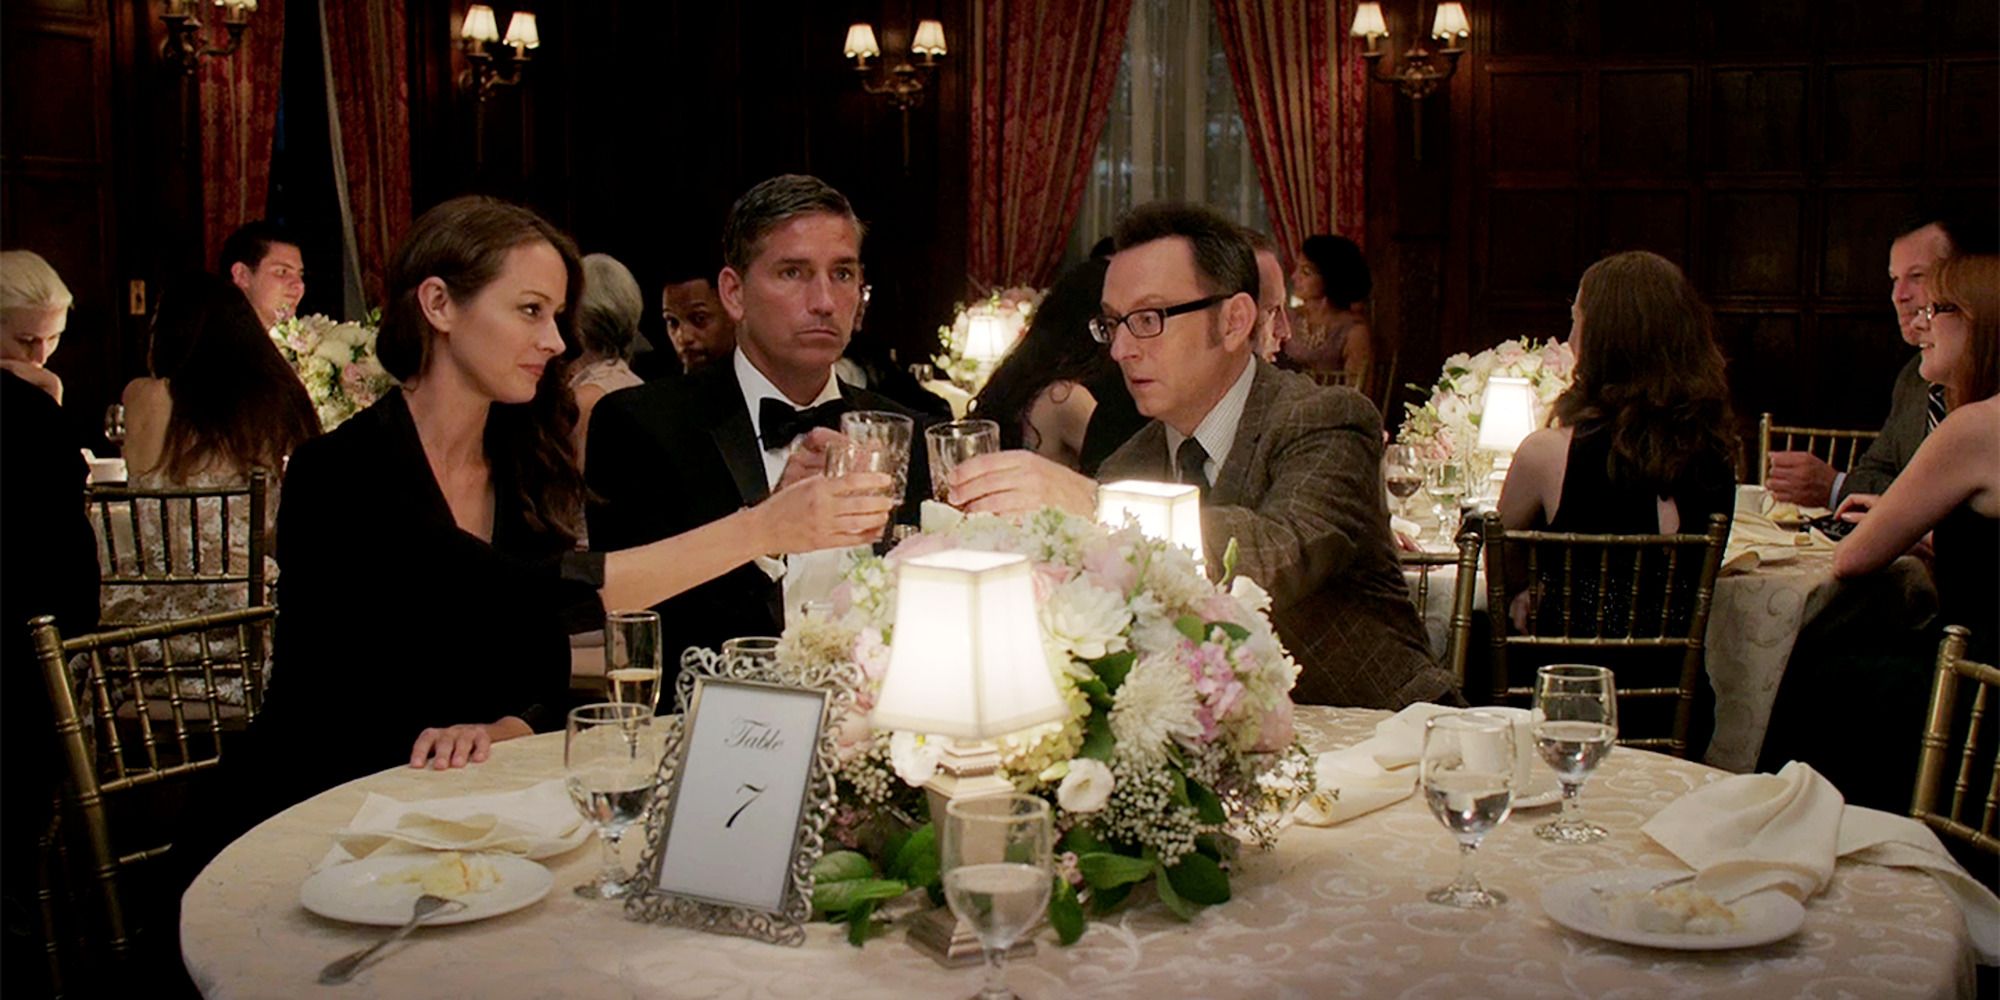 Amy Acker, Jim Caviezel, and Michael Emerson at a fancy dinner table in 'Person of Interest'